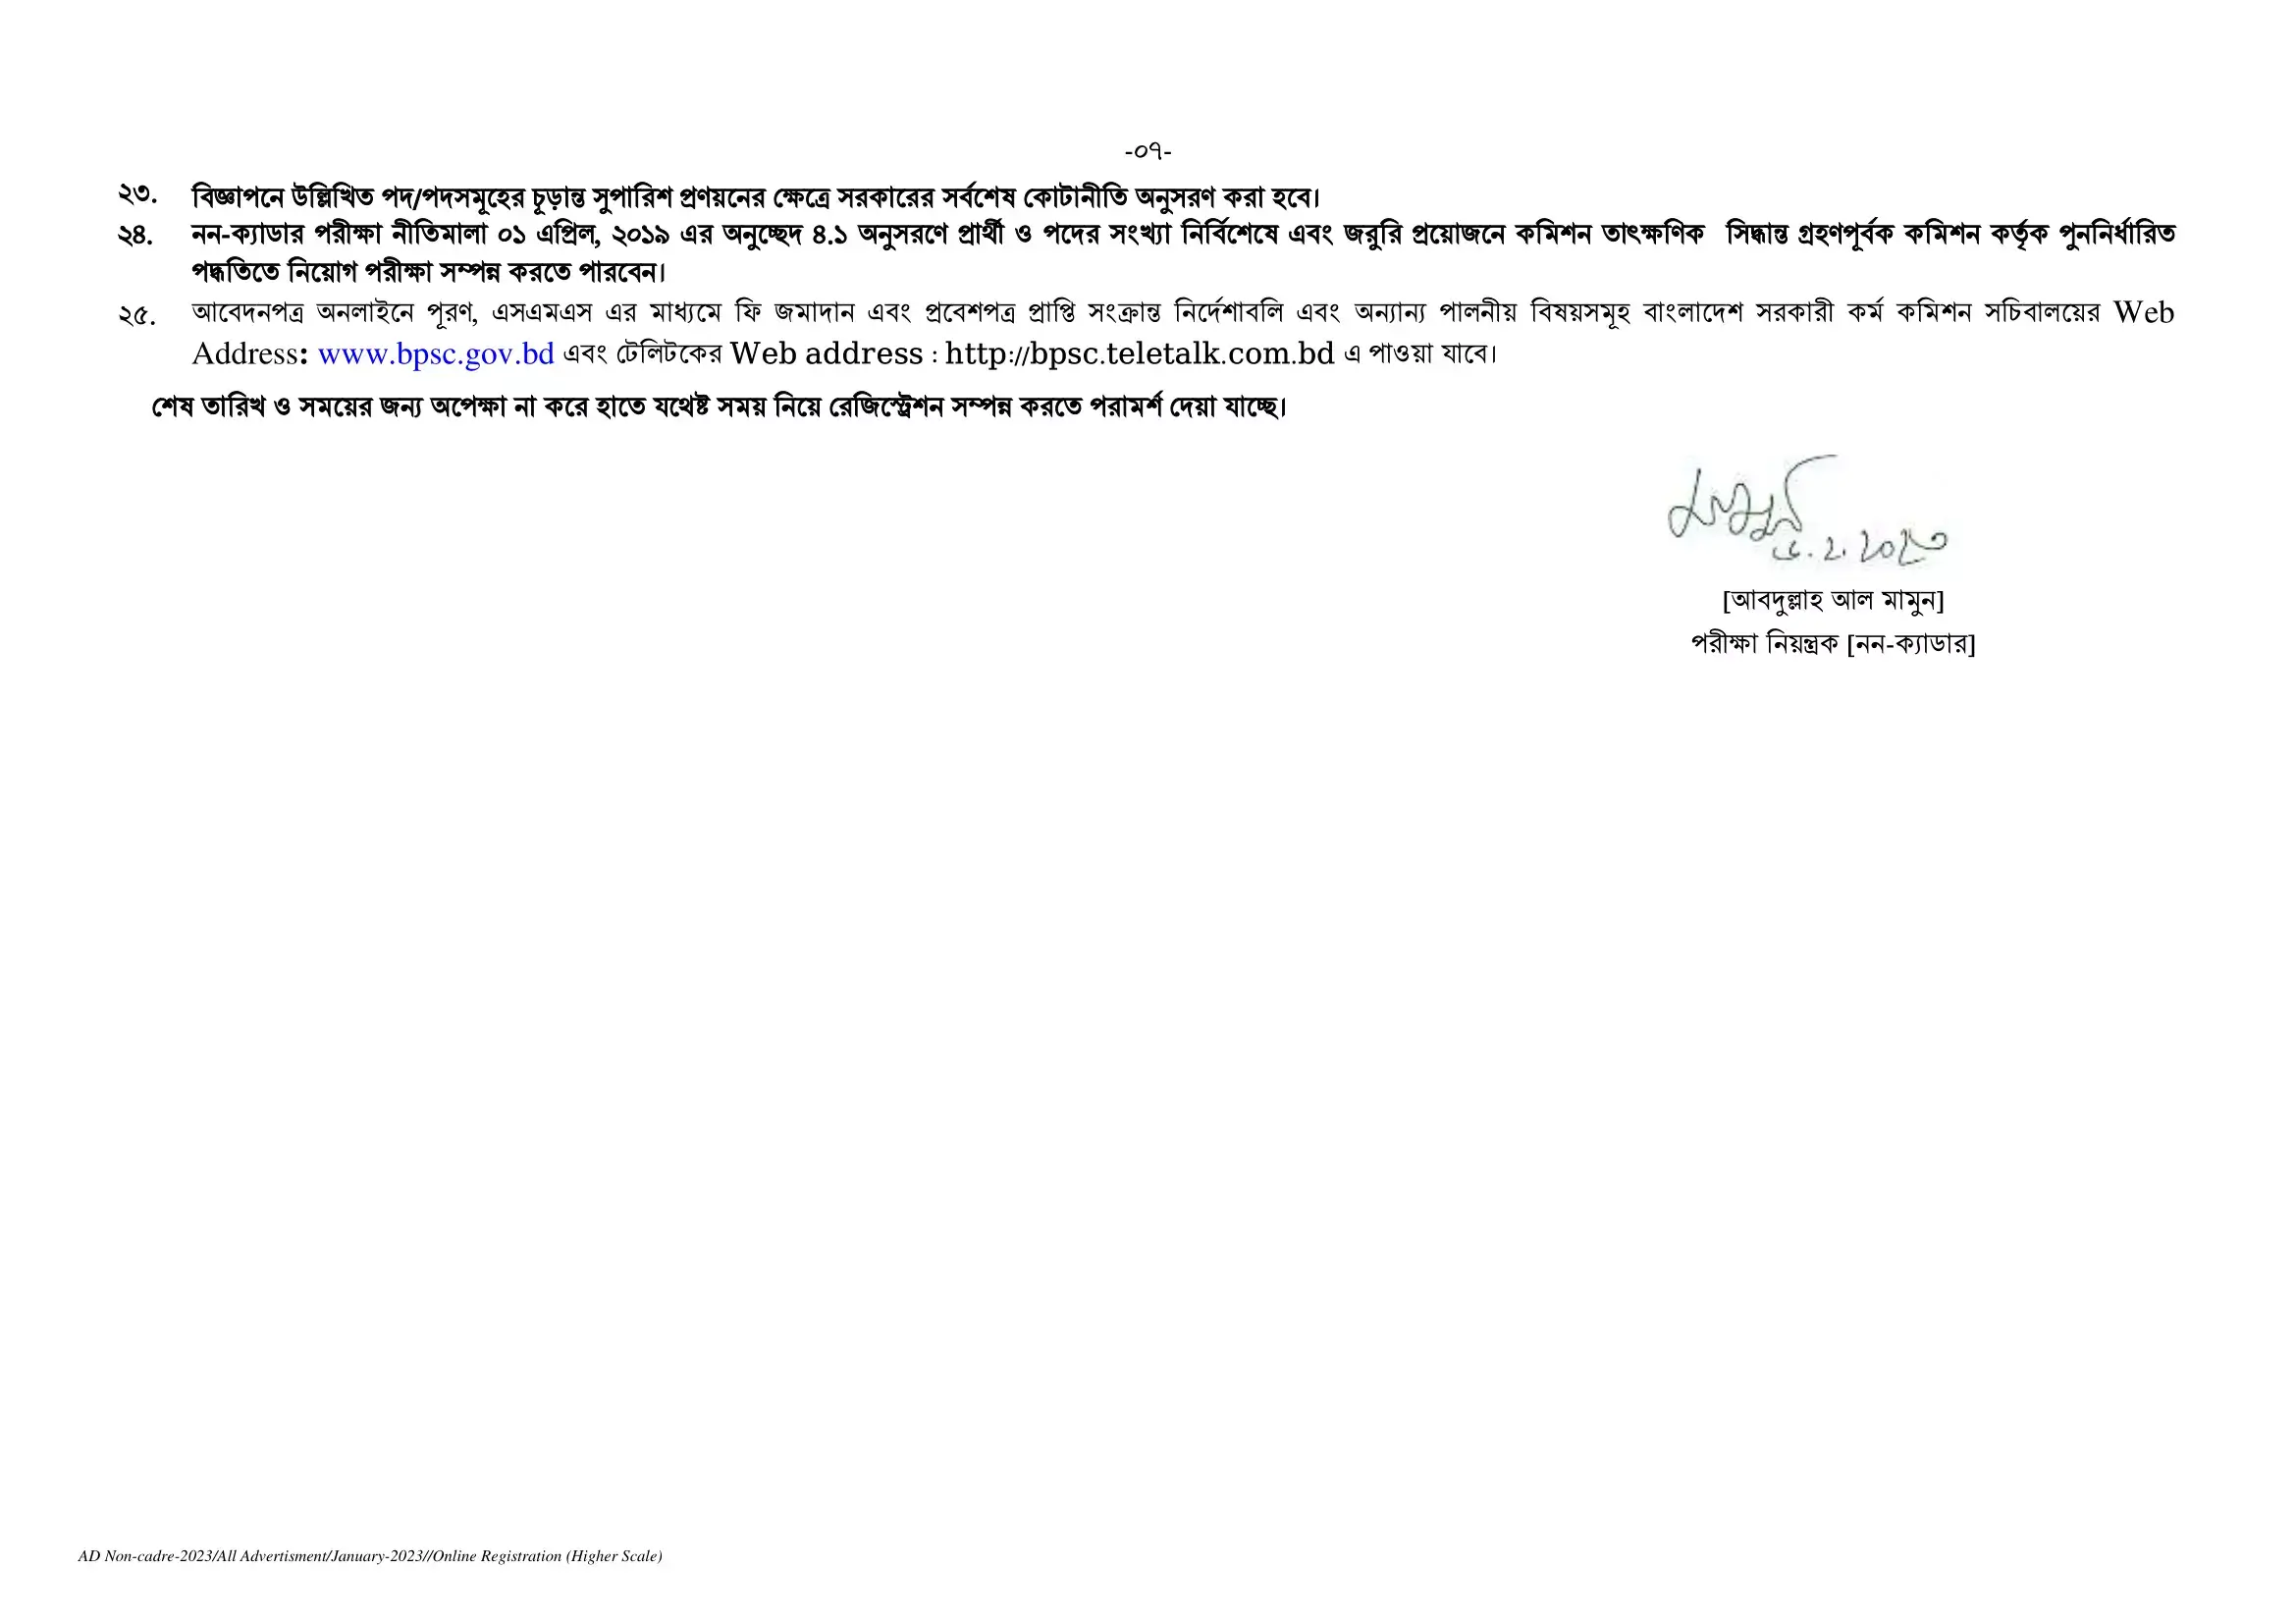 BPSC non cadre job circular published on 06 February 2023